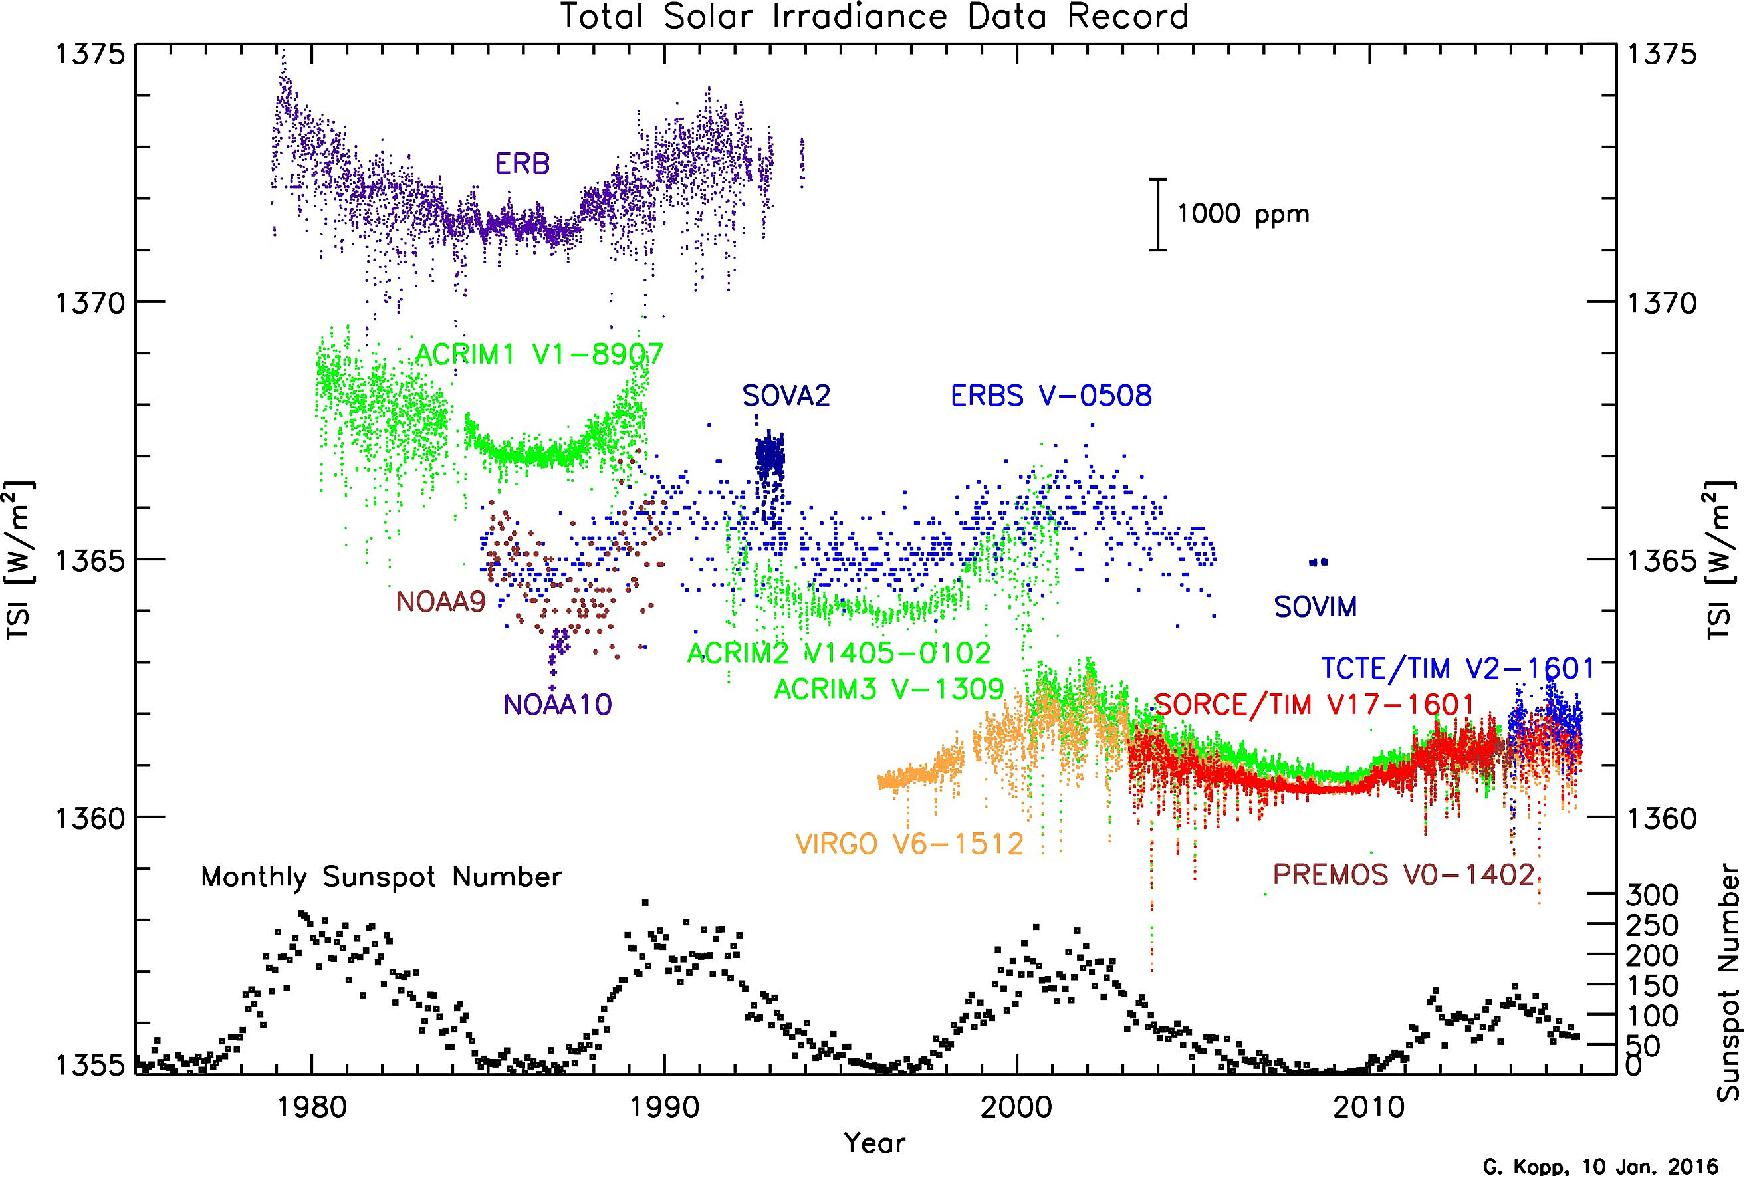 Figure 6: The TSI Climate Data Record now spans 36 years. Instrument offsets are unresolved calibration differences, much of which are due to internal instrument scatter (image credit: CU/LASP)